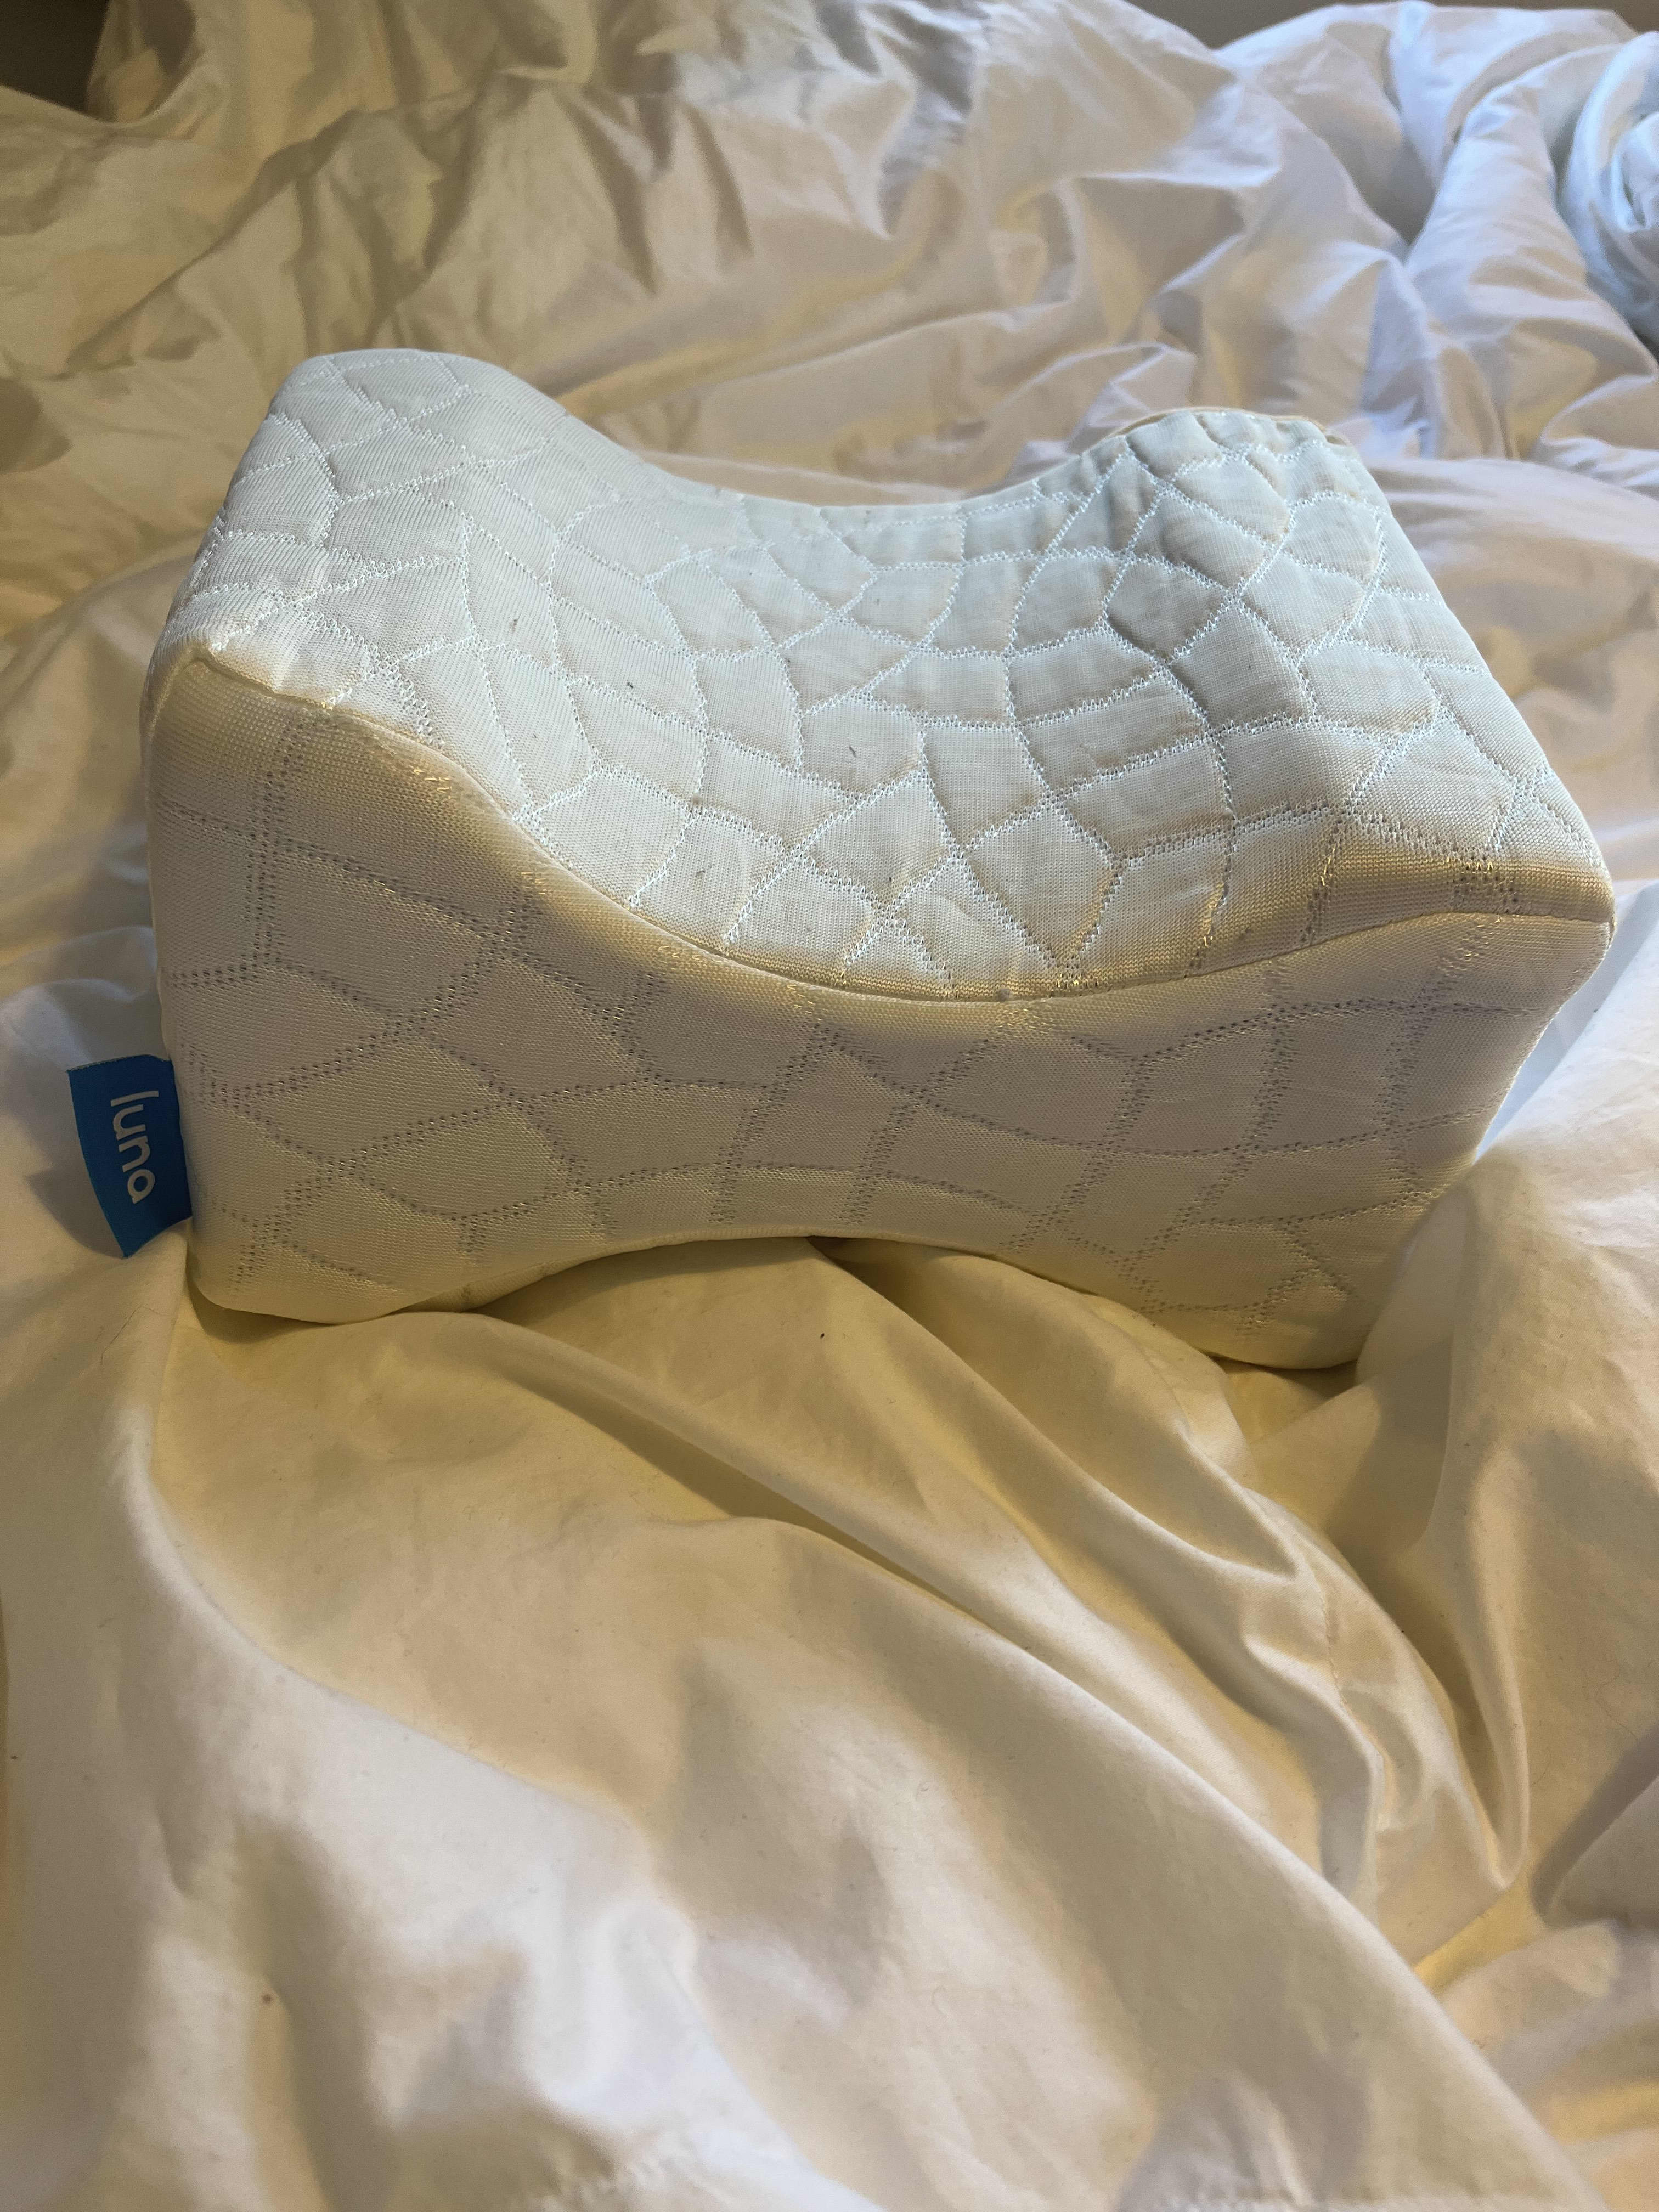 The Game-Changing Pillow That Eases My Back Pain and Helps Me Sleep More  Comfortably on My Side (It's on Sale!)